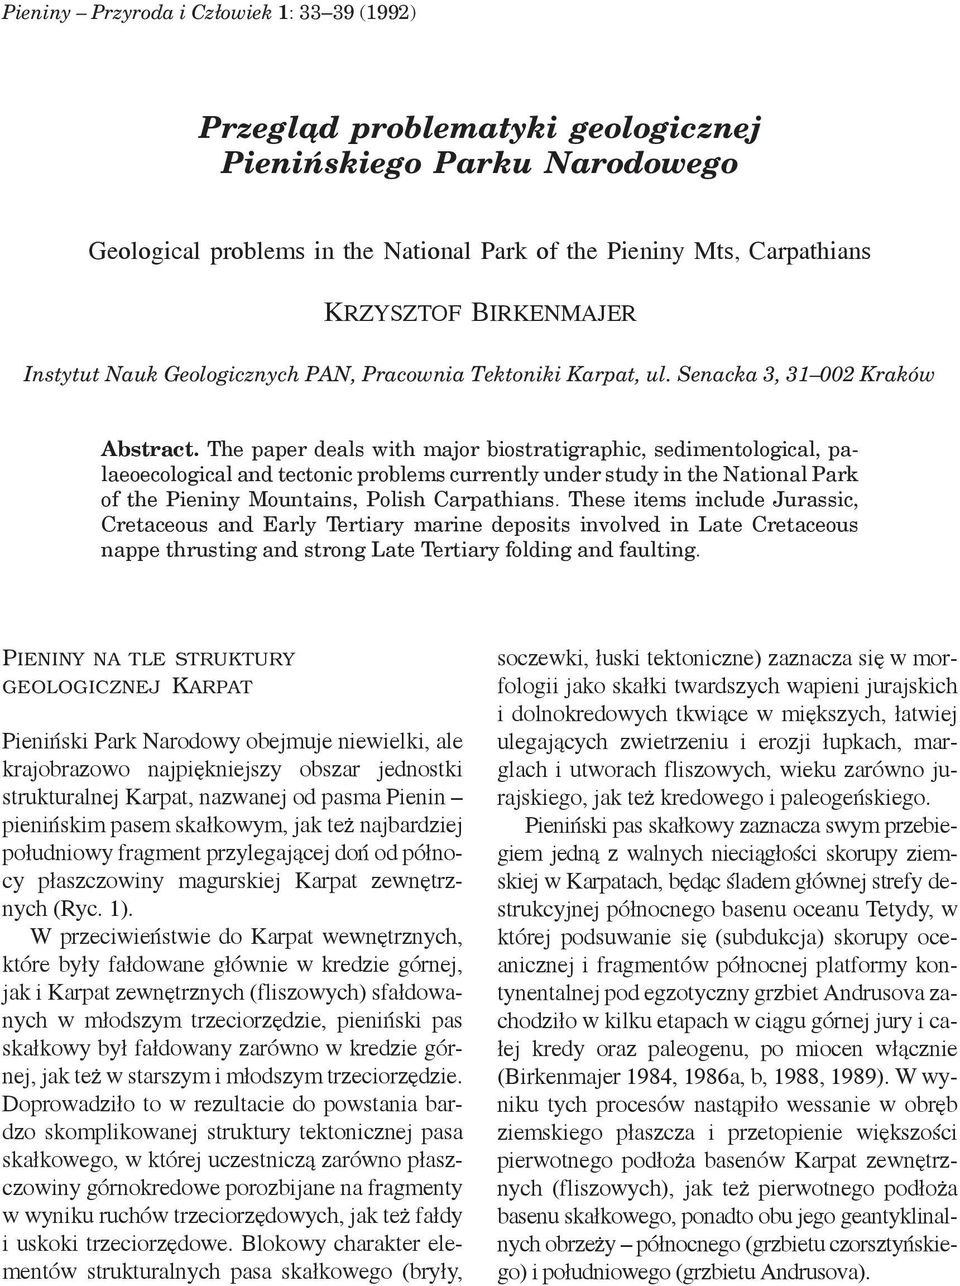 The paper deals with major biostratigraphic, sedimentological, palaeoecological and tectonic problems currently under study in the National Park of the Pieniny Mountains, Polish Carpathians.